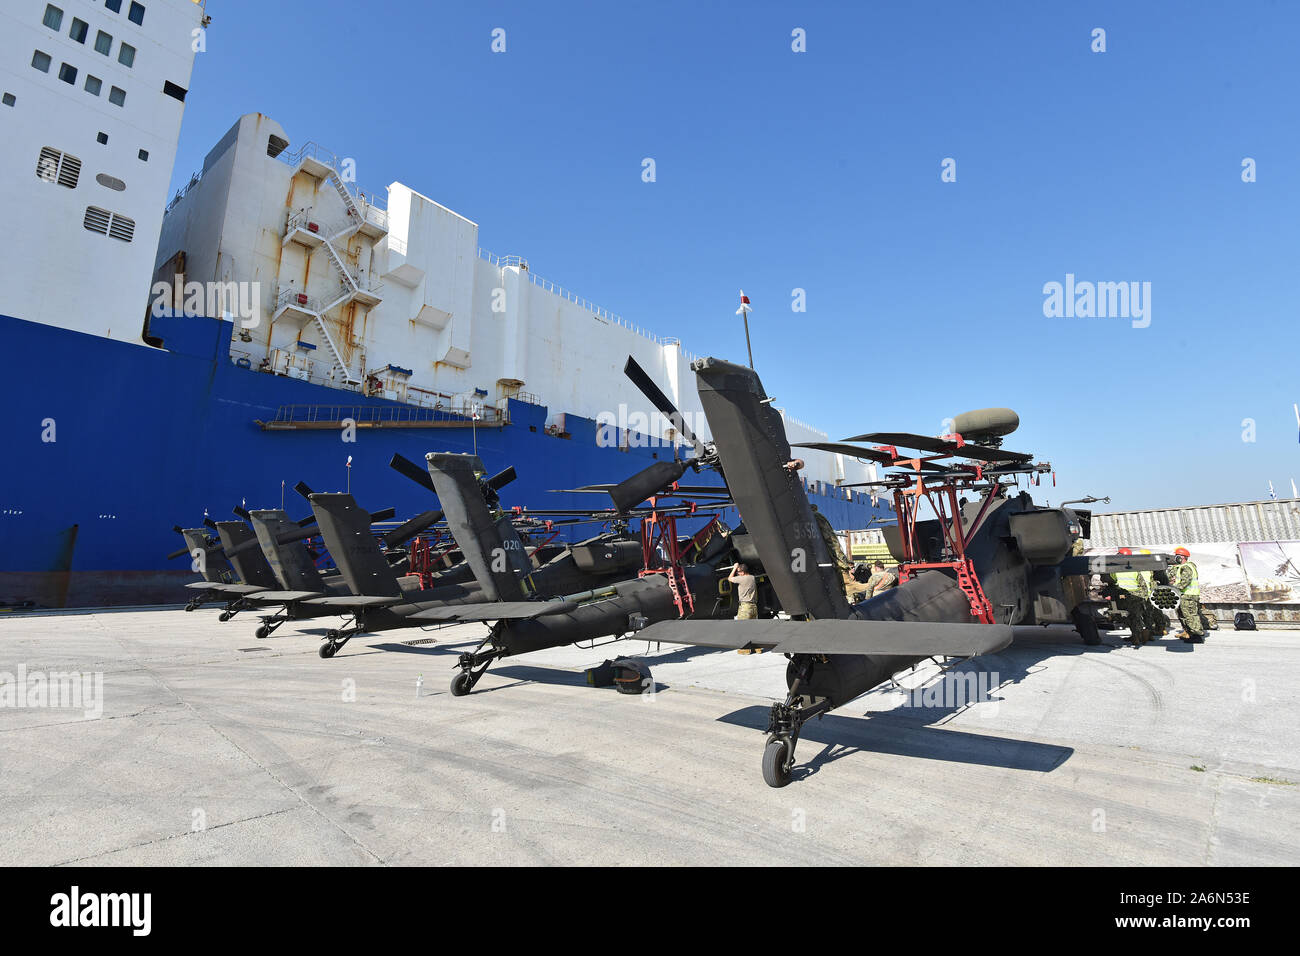 U.S. Army AH-64 Apache helicopters offloaded from the cargo vessel, ARC Endurance, at Volos Port, Greece Oct 26, 2019. The offload occurred during the 3rd Combat Aviation Brigade’s deployment (Import) in support of Atlantic Resolve. The aviation brigade was met by several units to include the 21st Theater Sustainment Command, 598th Transportation Brigade, 839th Transportation Battalion and host-nation partners who coordinated port operations to ensure 3CAB’s successful arrival and preparation for onward movement into the European theater. 3CAB will play a critical role in Atlantic Resolve by t Stock Photo